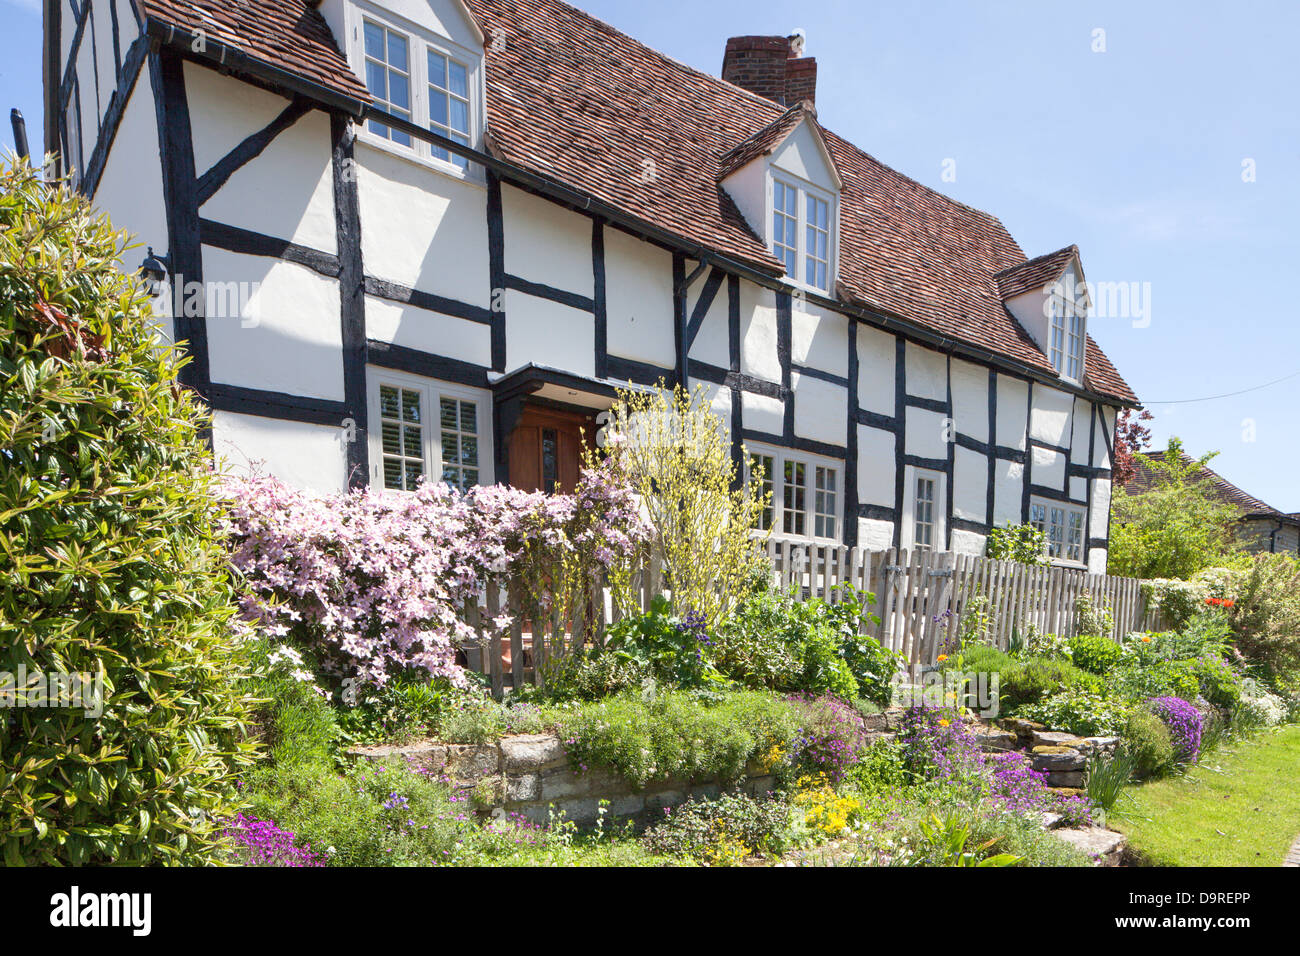 Half timbered cottage in the Warwickshire village of Billesley, England, UK Stock Photo